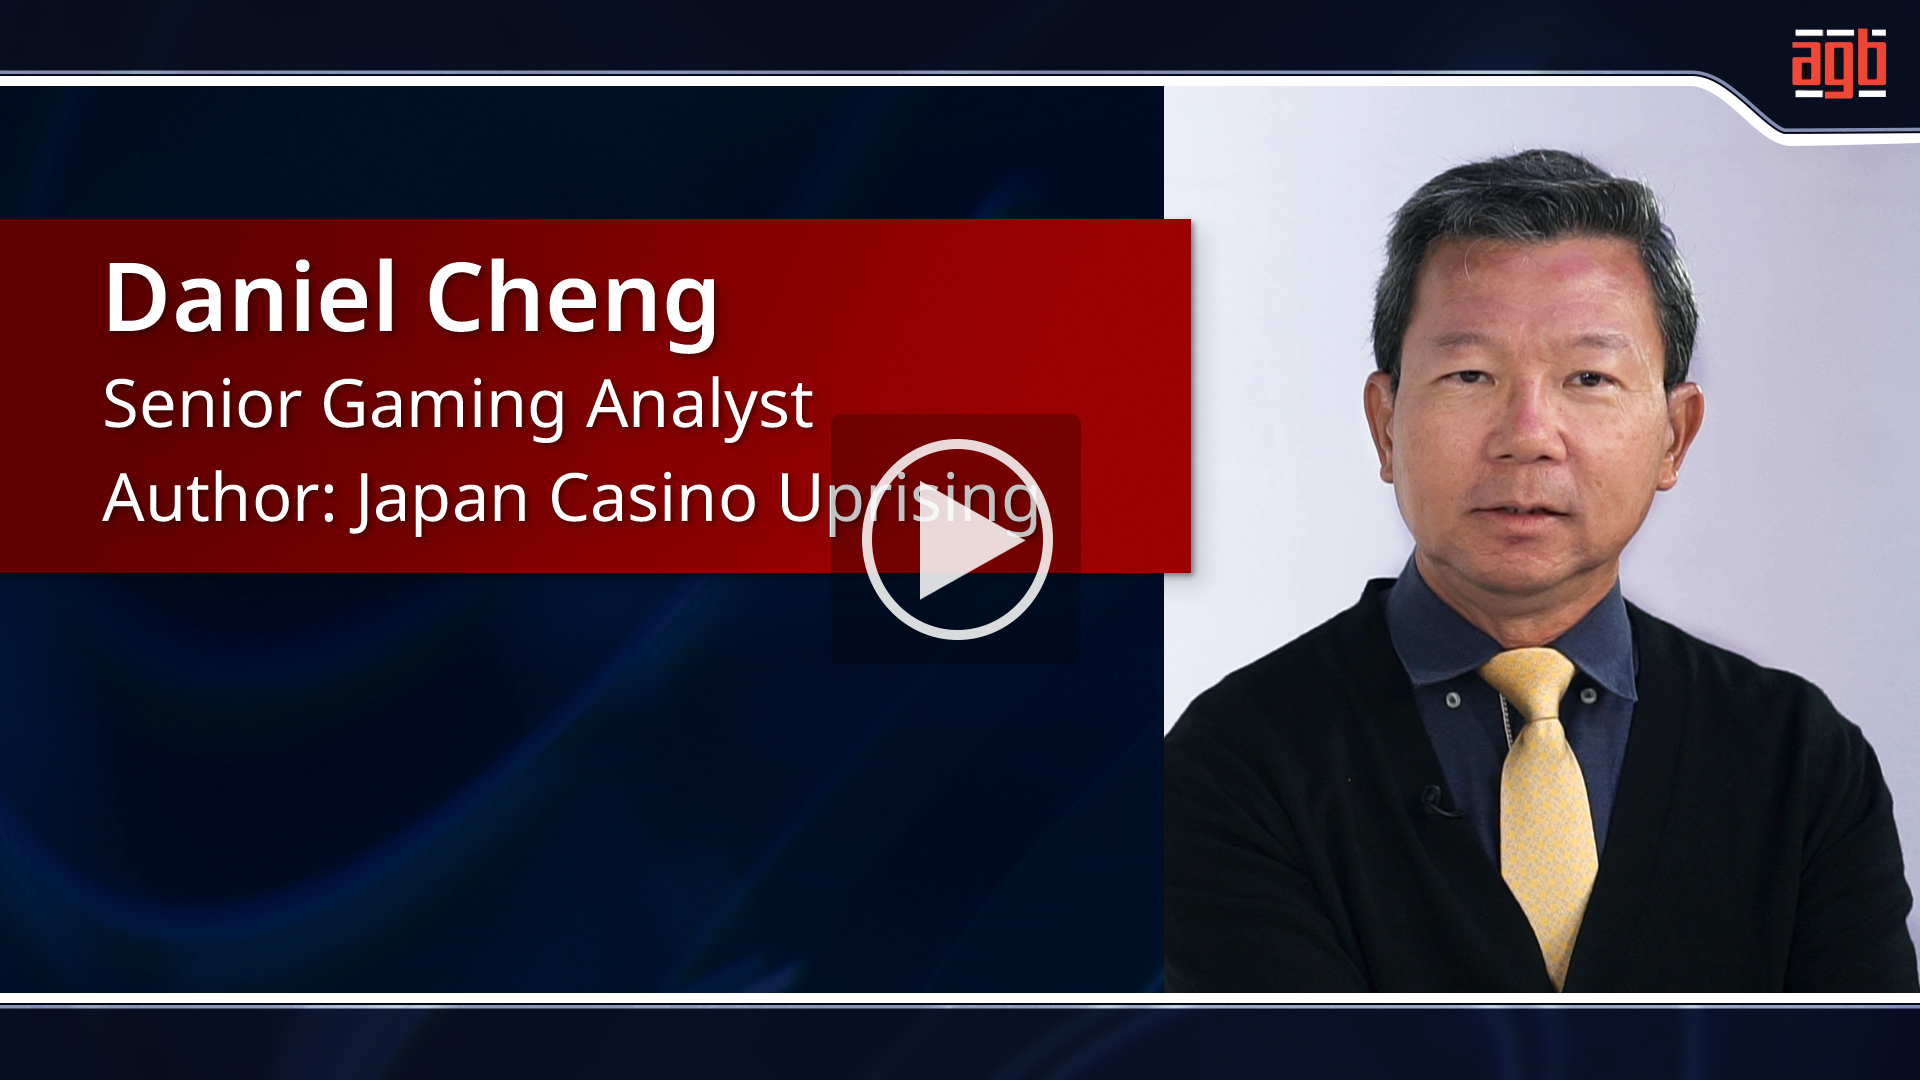 Japan and Thailand casino uprising by Daniel Cheng, asia gaming ebrief